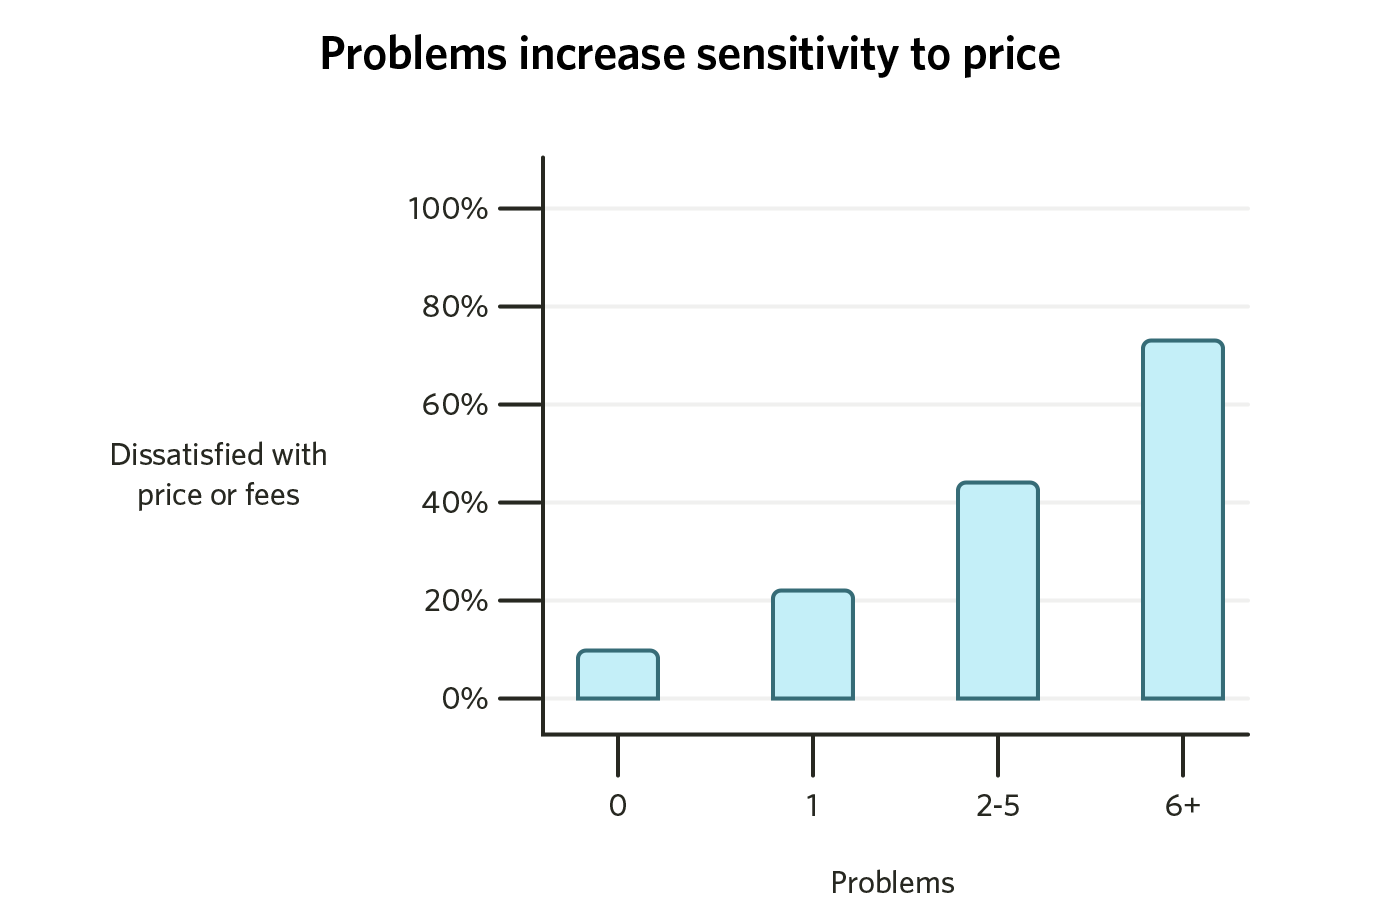 Problems increase sensitivity to price